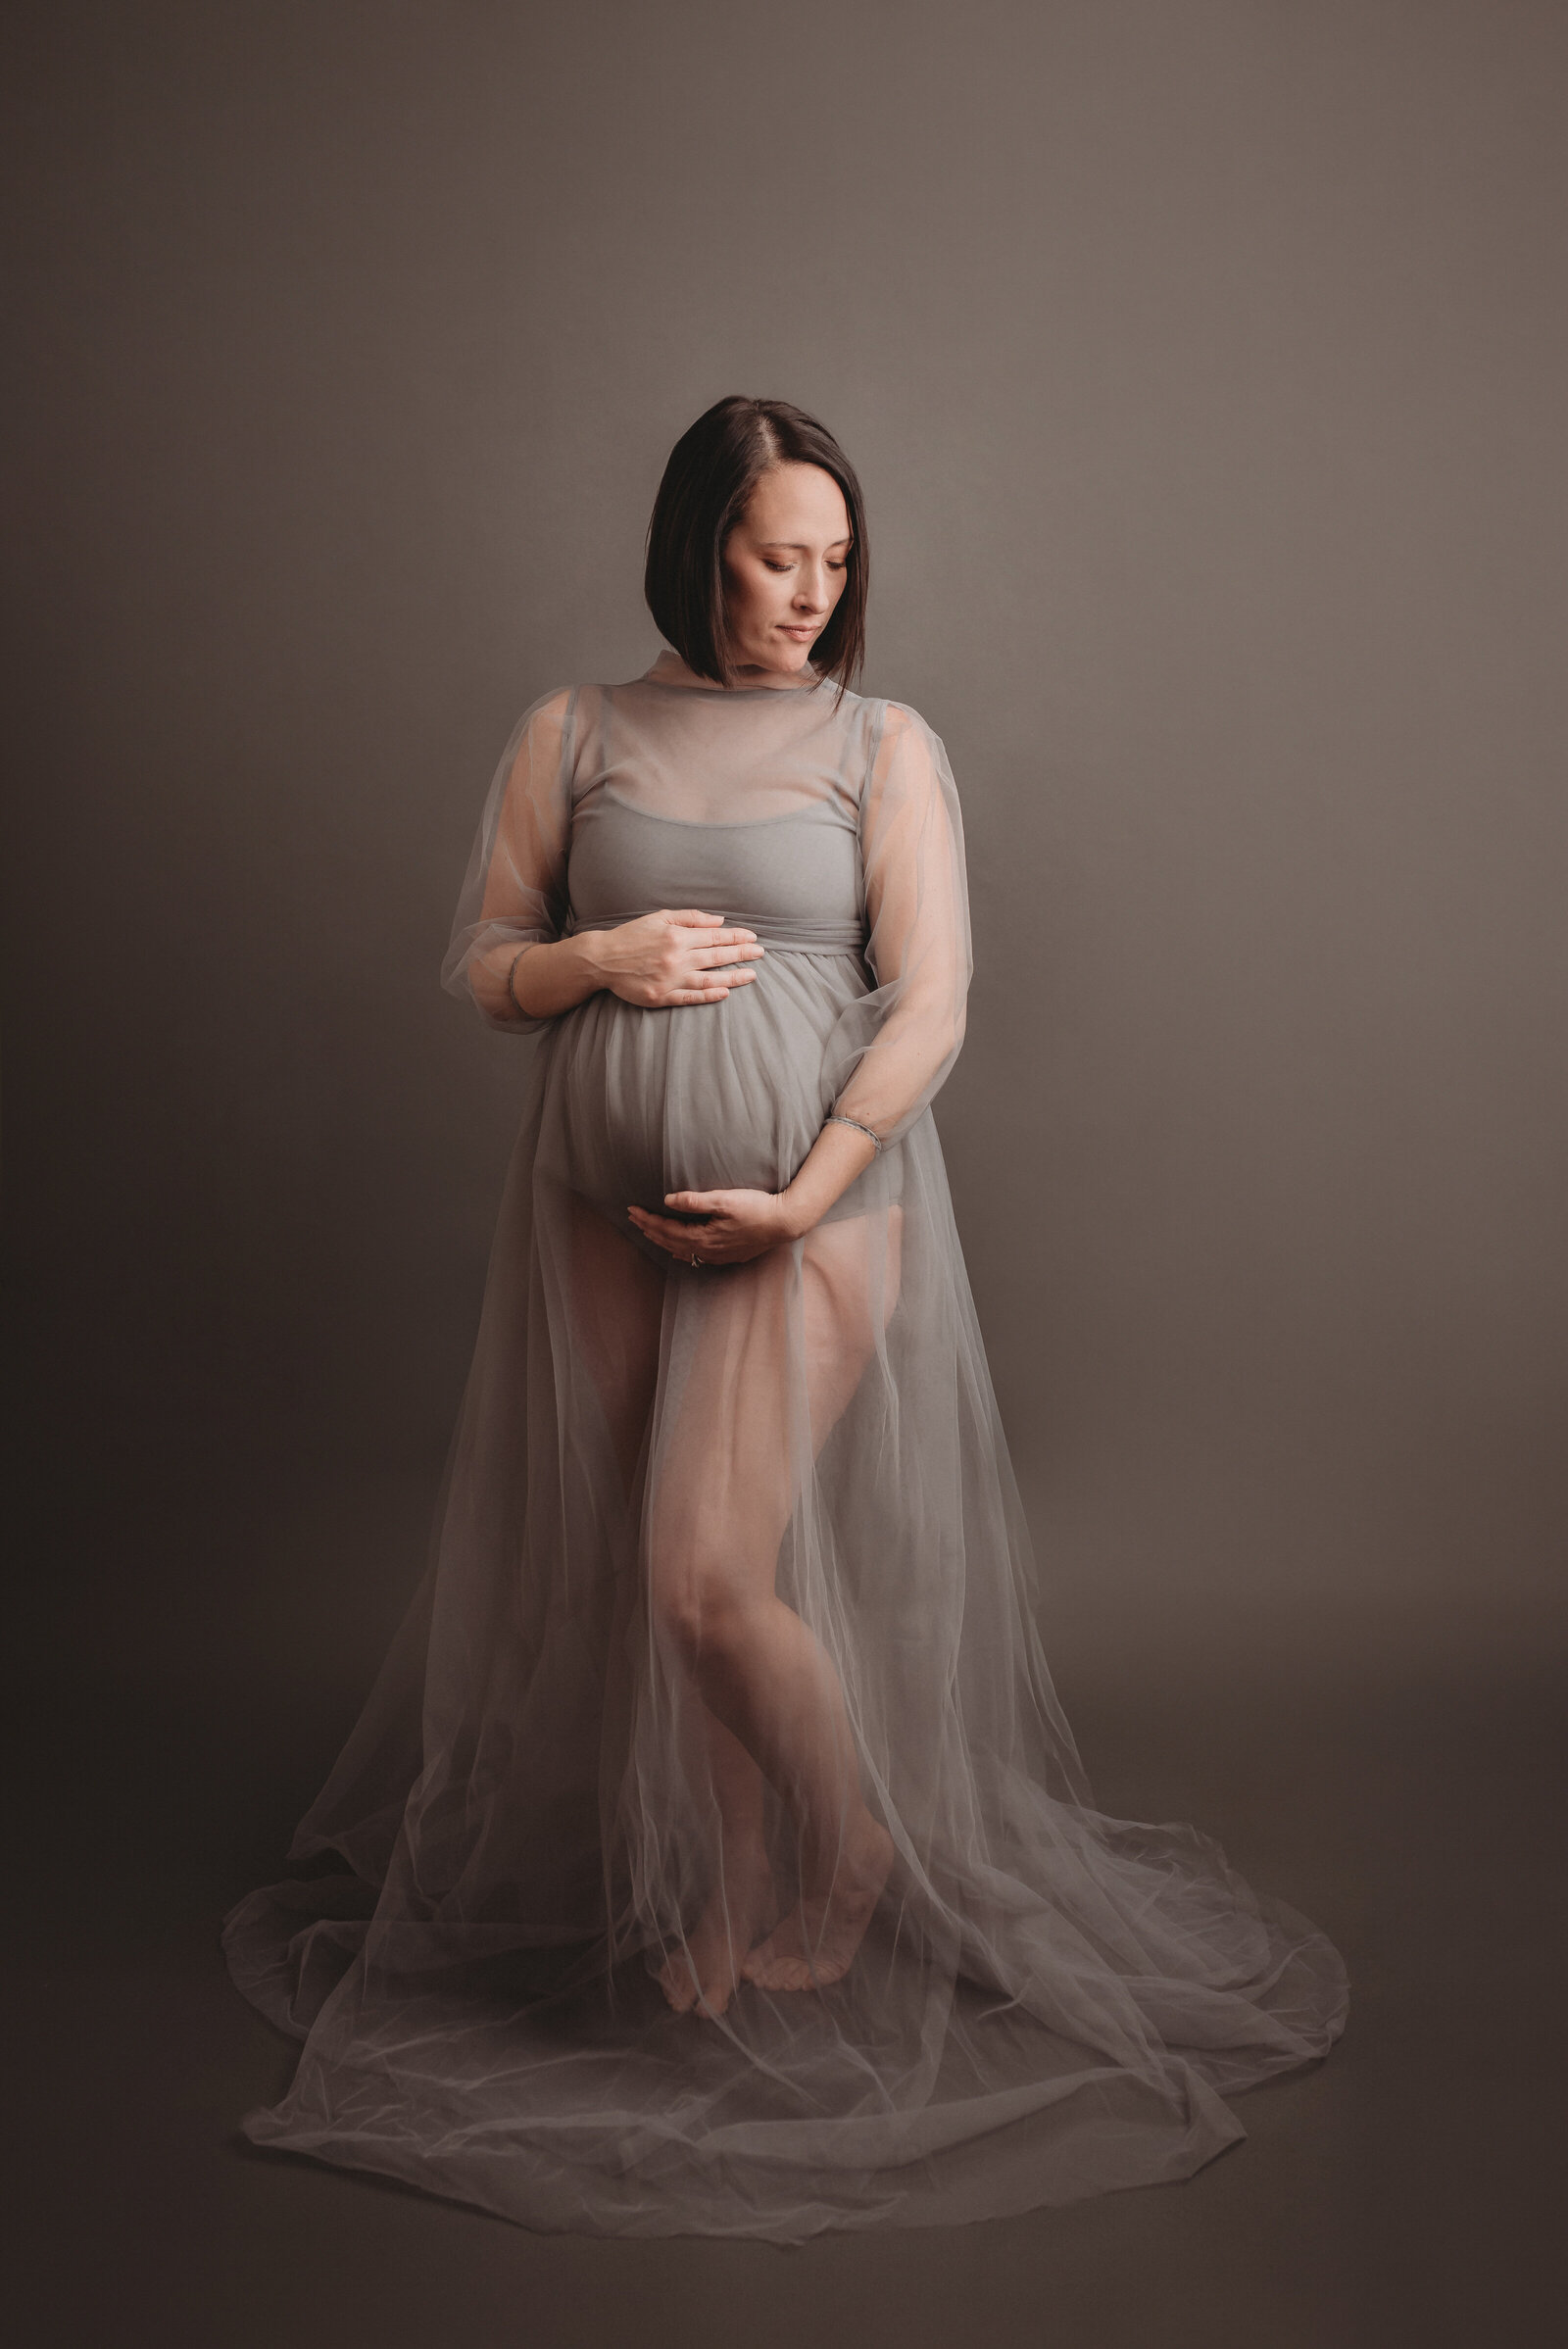 Pregnant mother posing in the studio wearing a grey tulle dress on gray backdrop